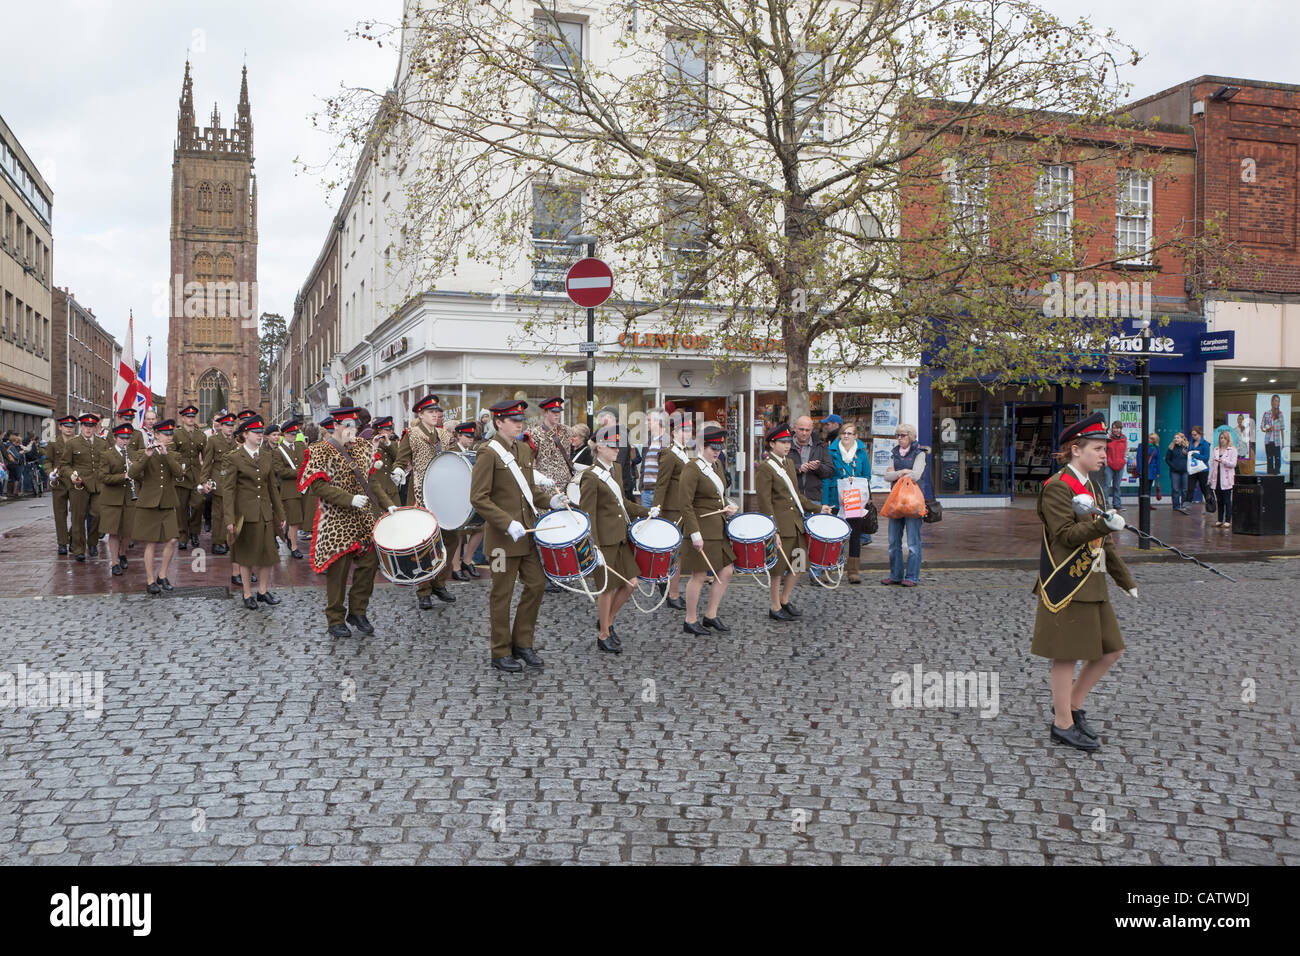 Army cadets marching through Taunton town centre, Somerset, England on Sunday 22nd April 2012 to celebrate St. George's day. This annual event is attended by regional Boy Scouts and Girl Guide groups to uphold the tradition of the patron Saint of England. Stock Photo